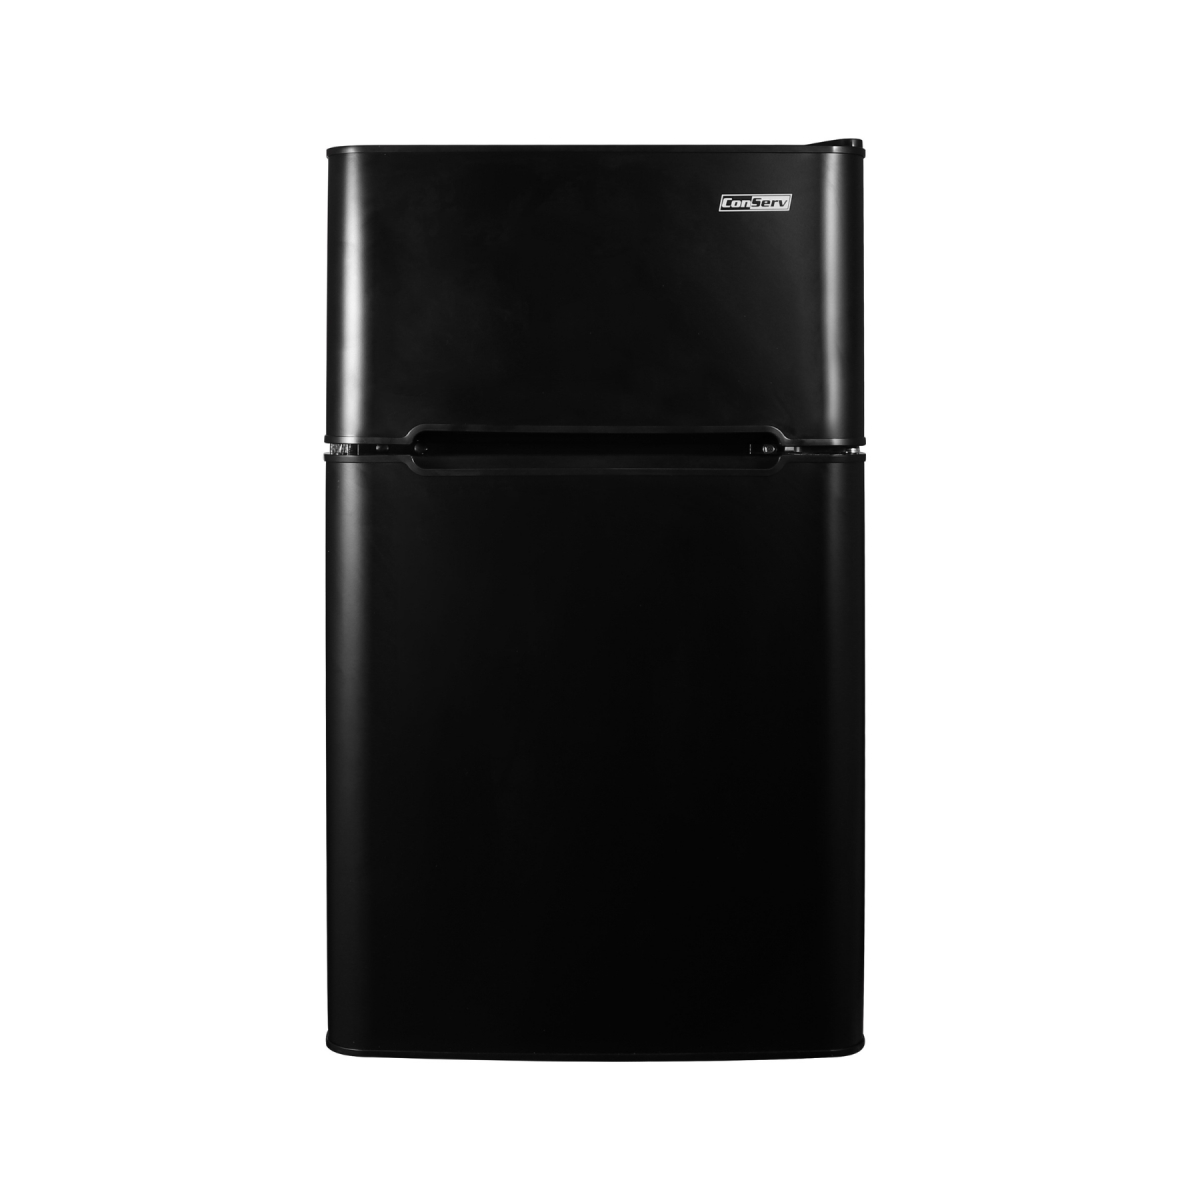 Picture of Conserv CRF 320 B ConServ 3 cu.ft 2 Door Mini Freestanding Refrigerator with Freezer in Black